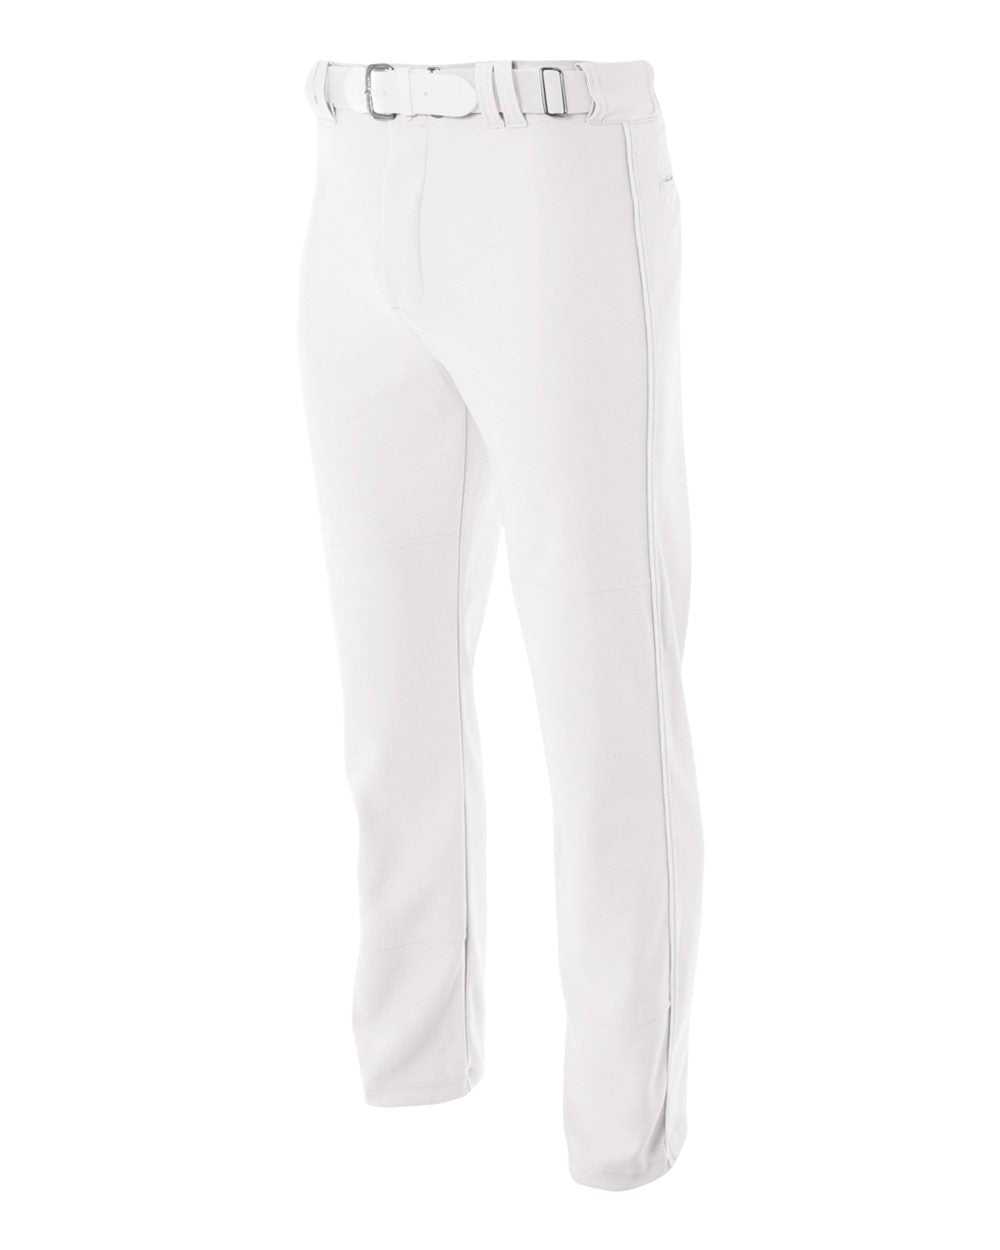 A4 NB6162 Youth Pro Style Open Bottom Baggy Cut Baseball Pant - White - HIT a Double